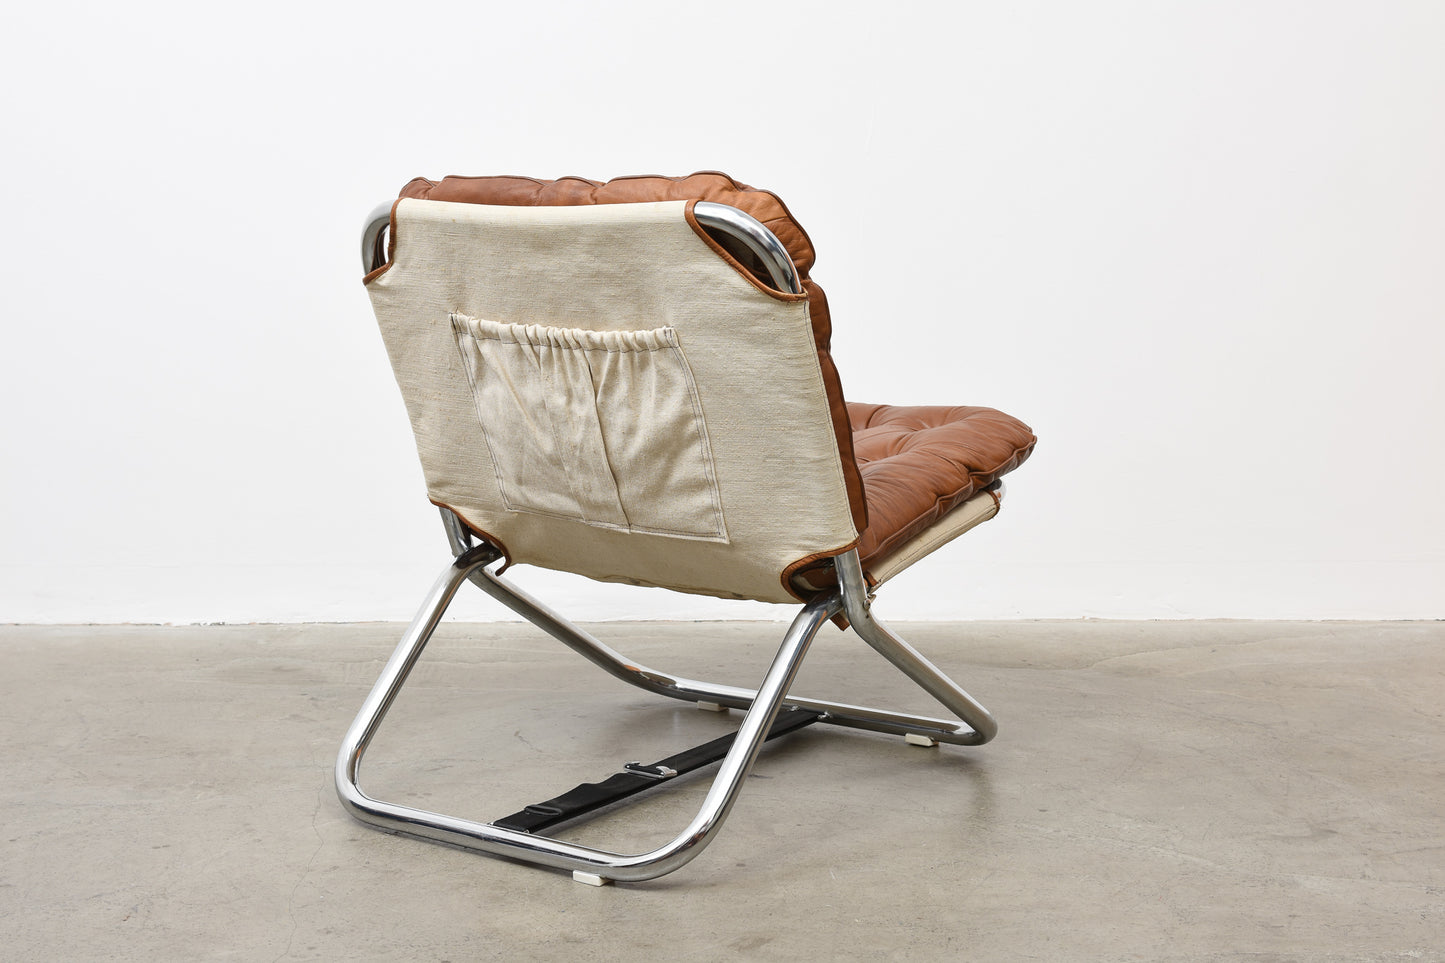 'Playboy' lounger by Rosvall & Giraud